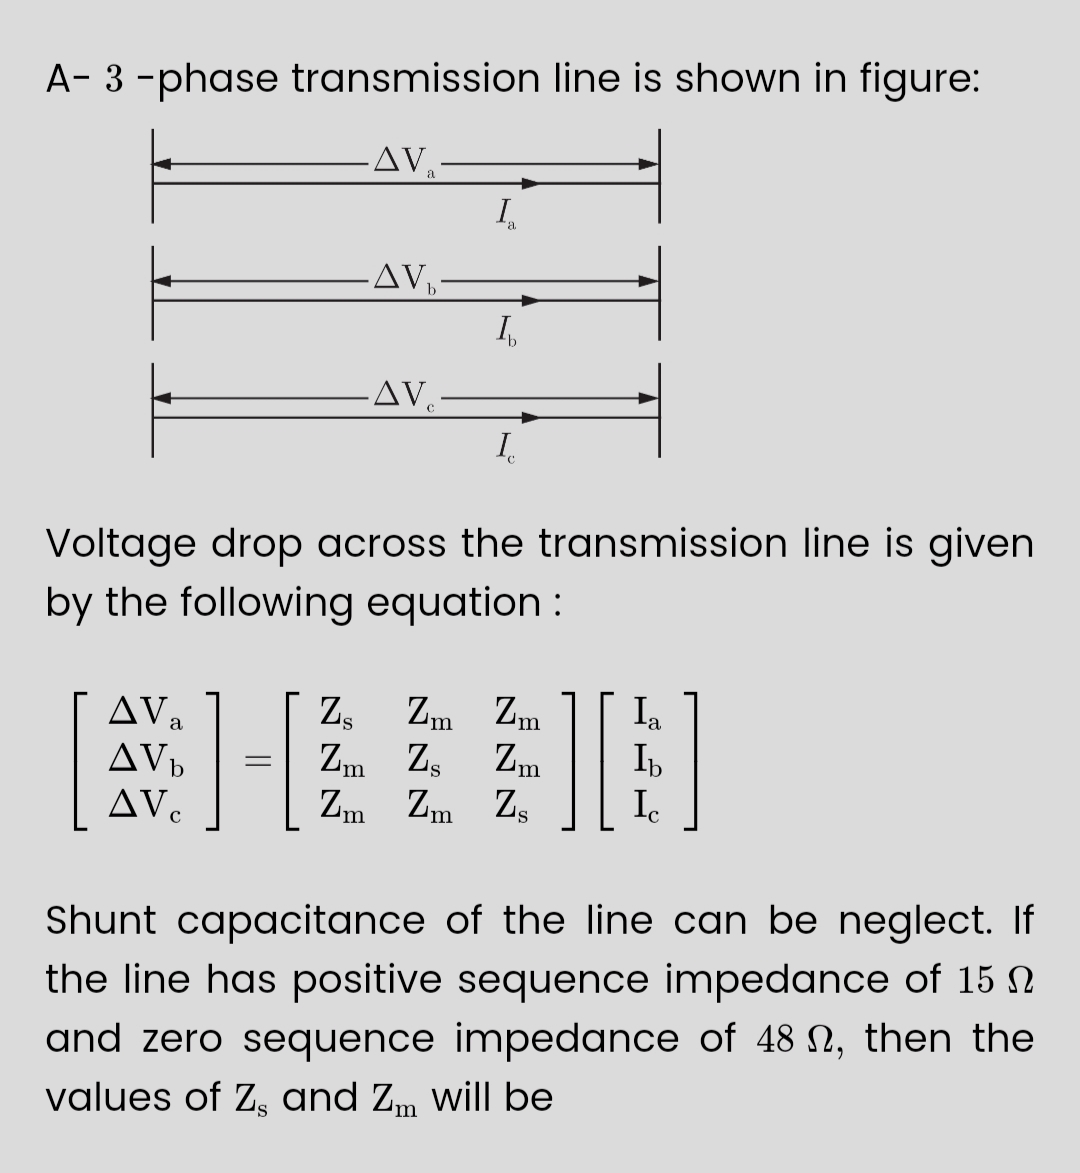 A-3-phase transmission line is shown in figure:
AV₂
AV b
AVC
-AV₂-
1-
=
-AV-
a
I
Voltage drop across the transmission line is given
by the following equation:
I
Z₂ Zm Zm
Zm Zs Zm
Zm Zm Zs
][
Ia
Ib
C
Shunt capacitance of the line can be neglect. If
the line has positive sequence impedance of 15 N
and zero sequence impedance of 48 , then the
values of Z, and Zm will be